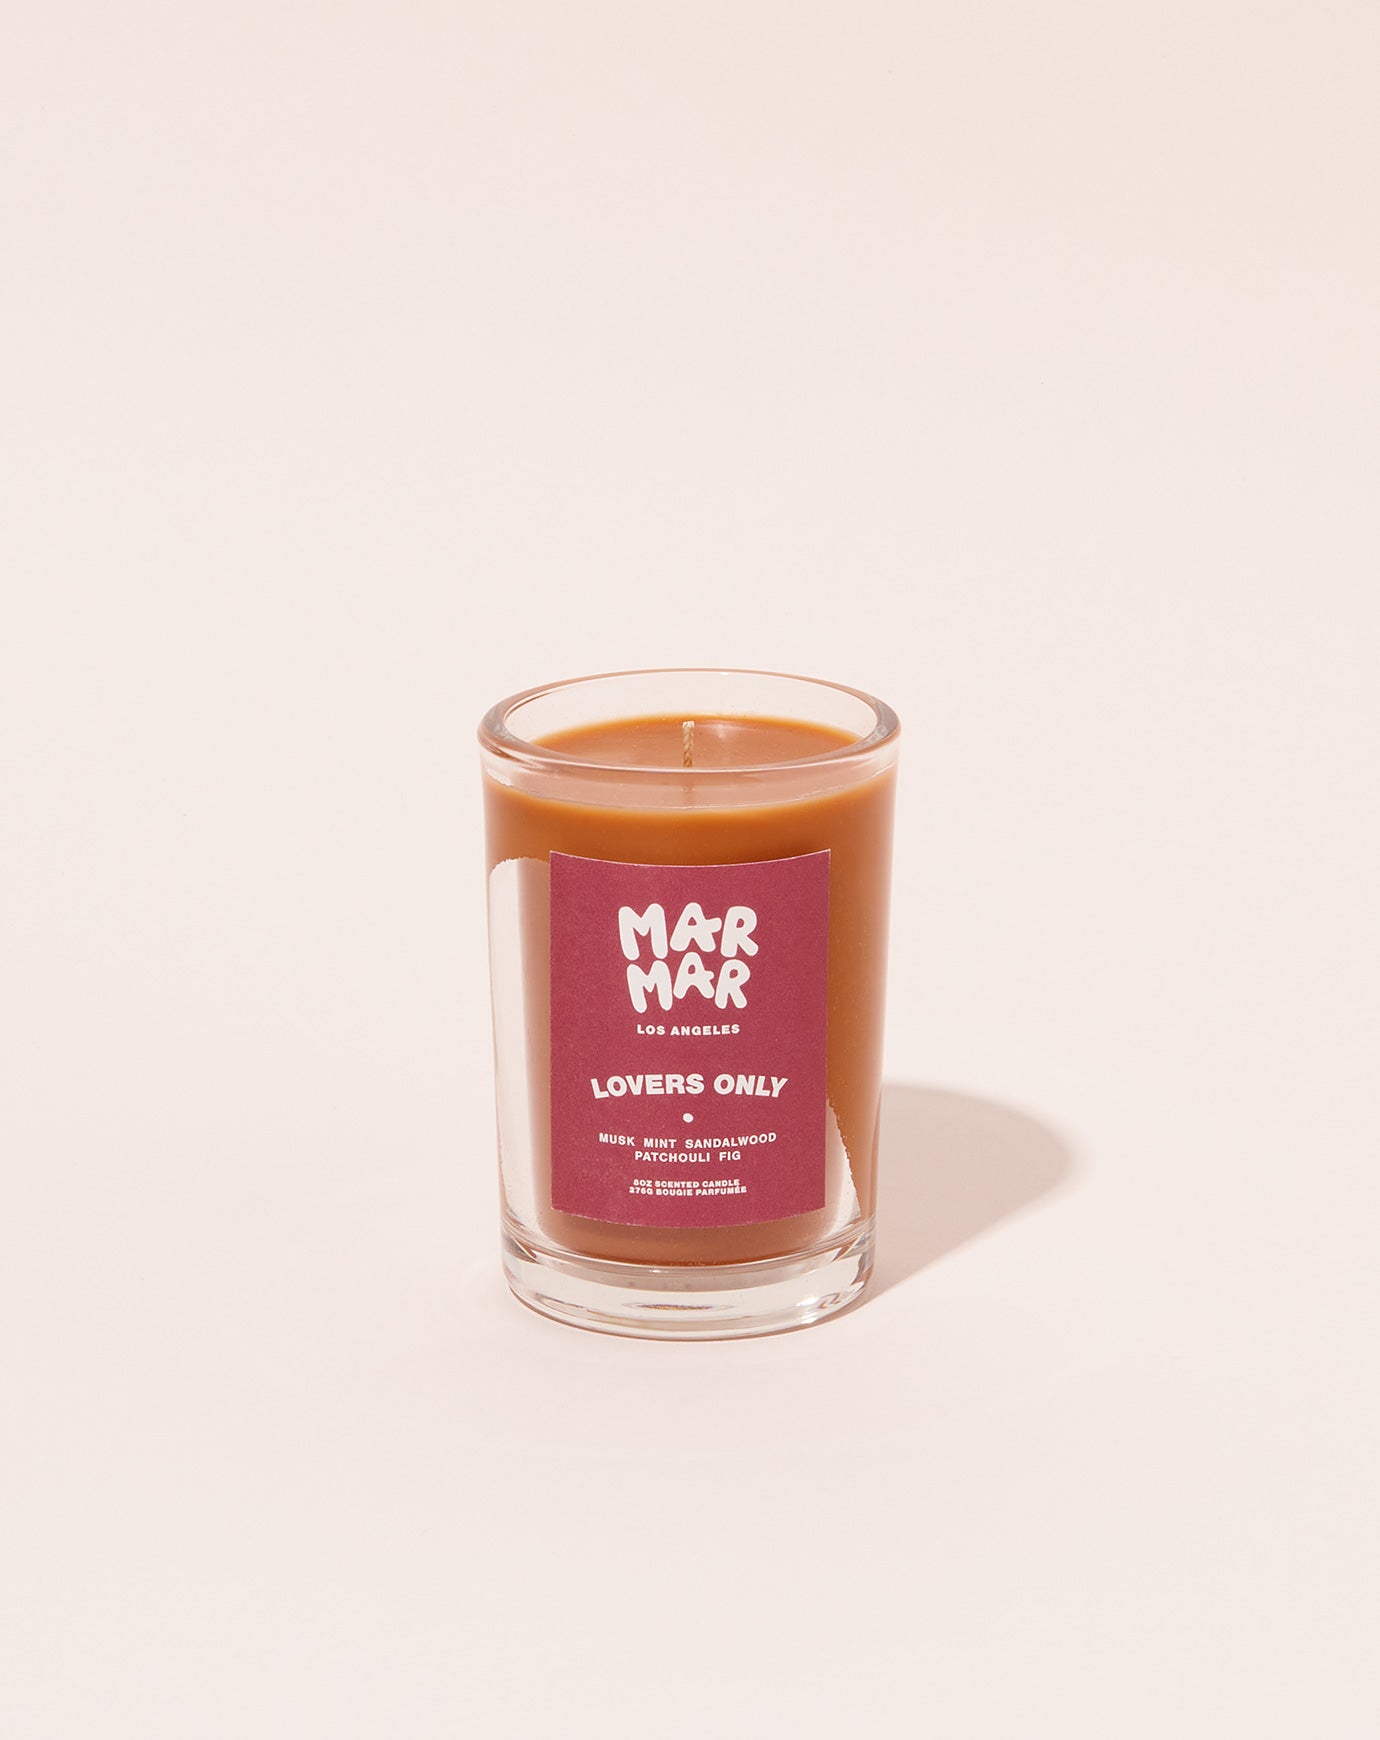 Mar Mar Lovers Only Candle